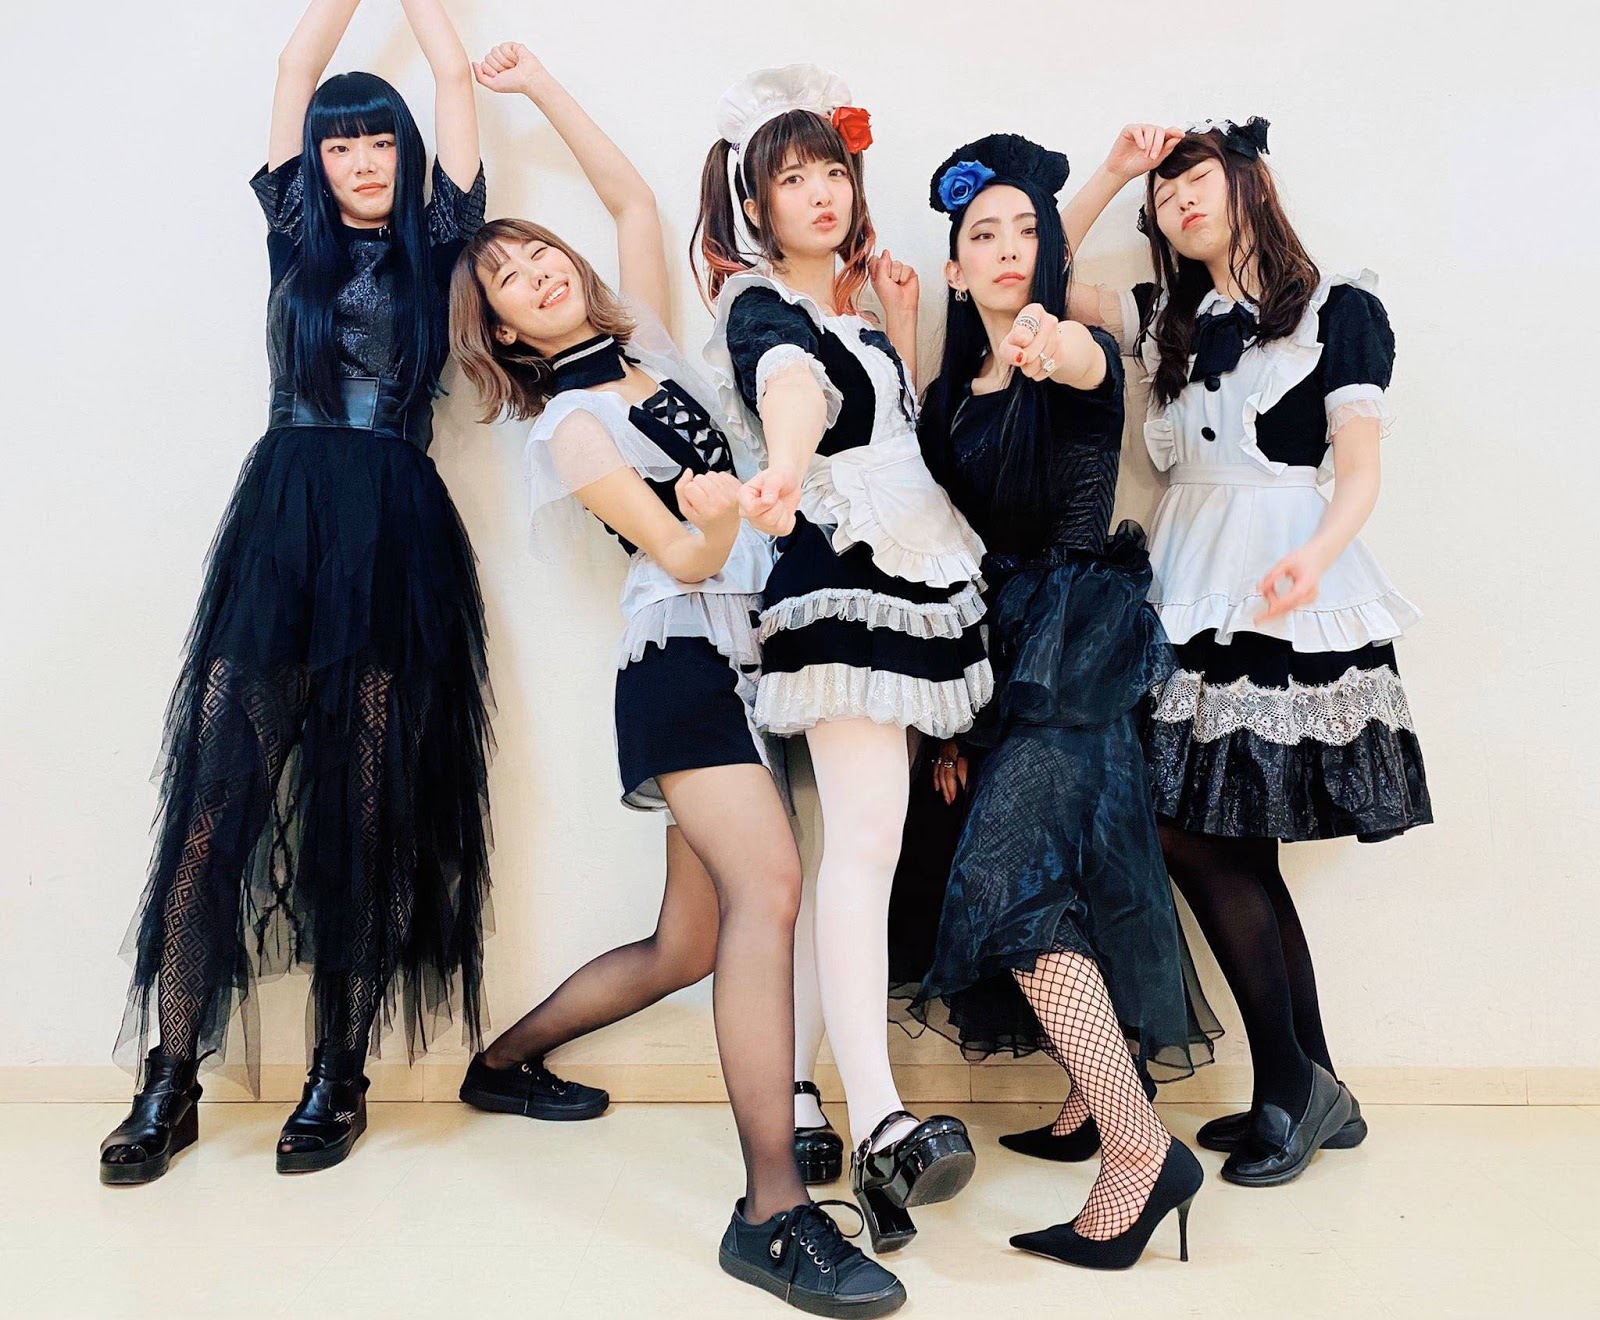 Band Maid Discography Download romconsult